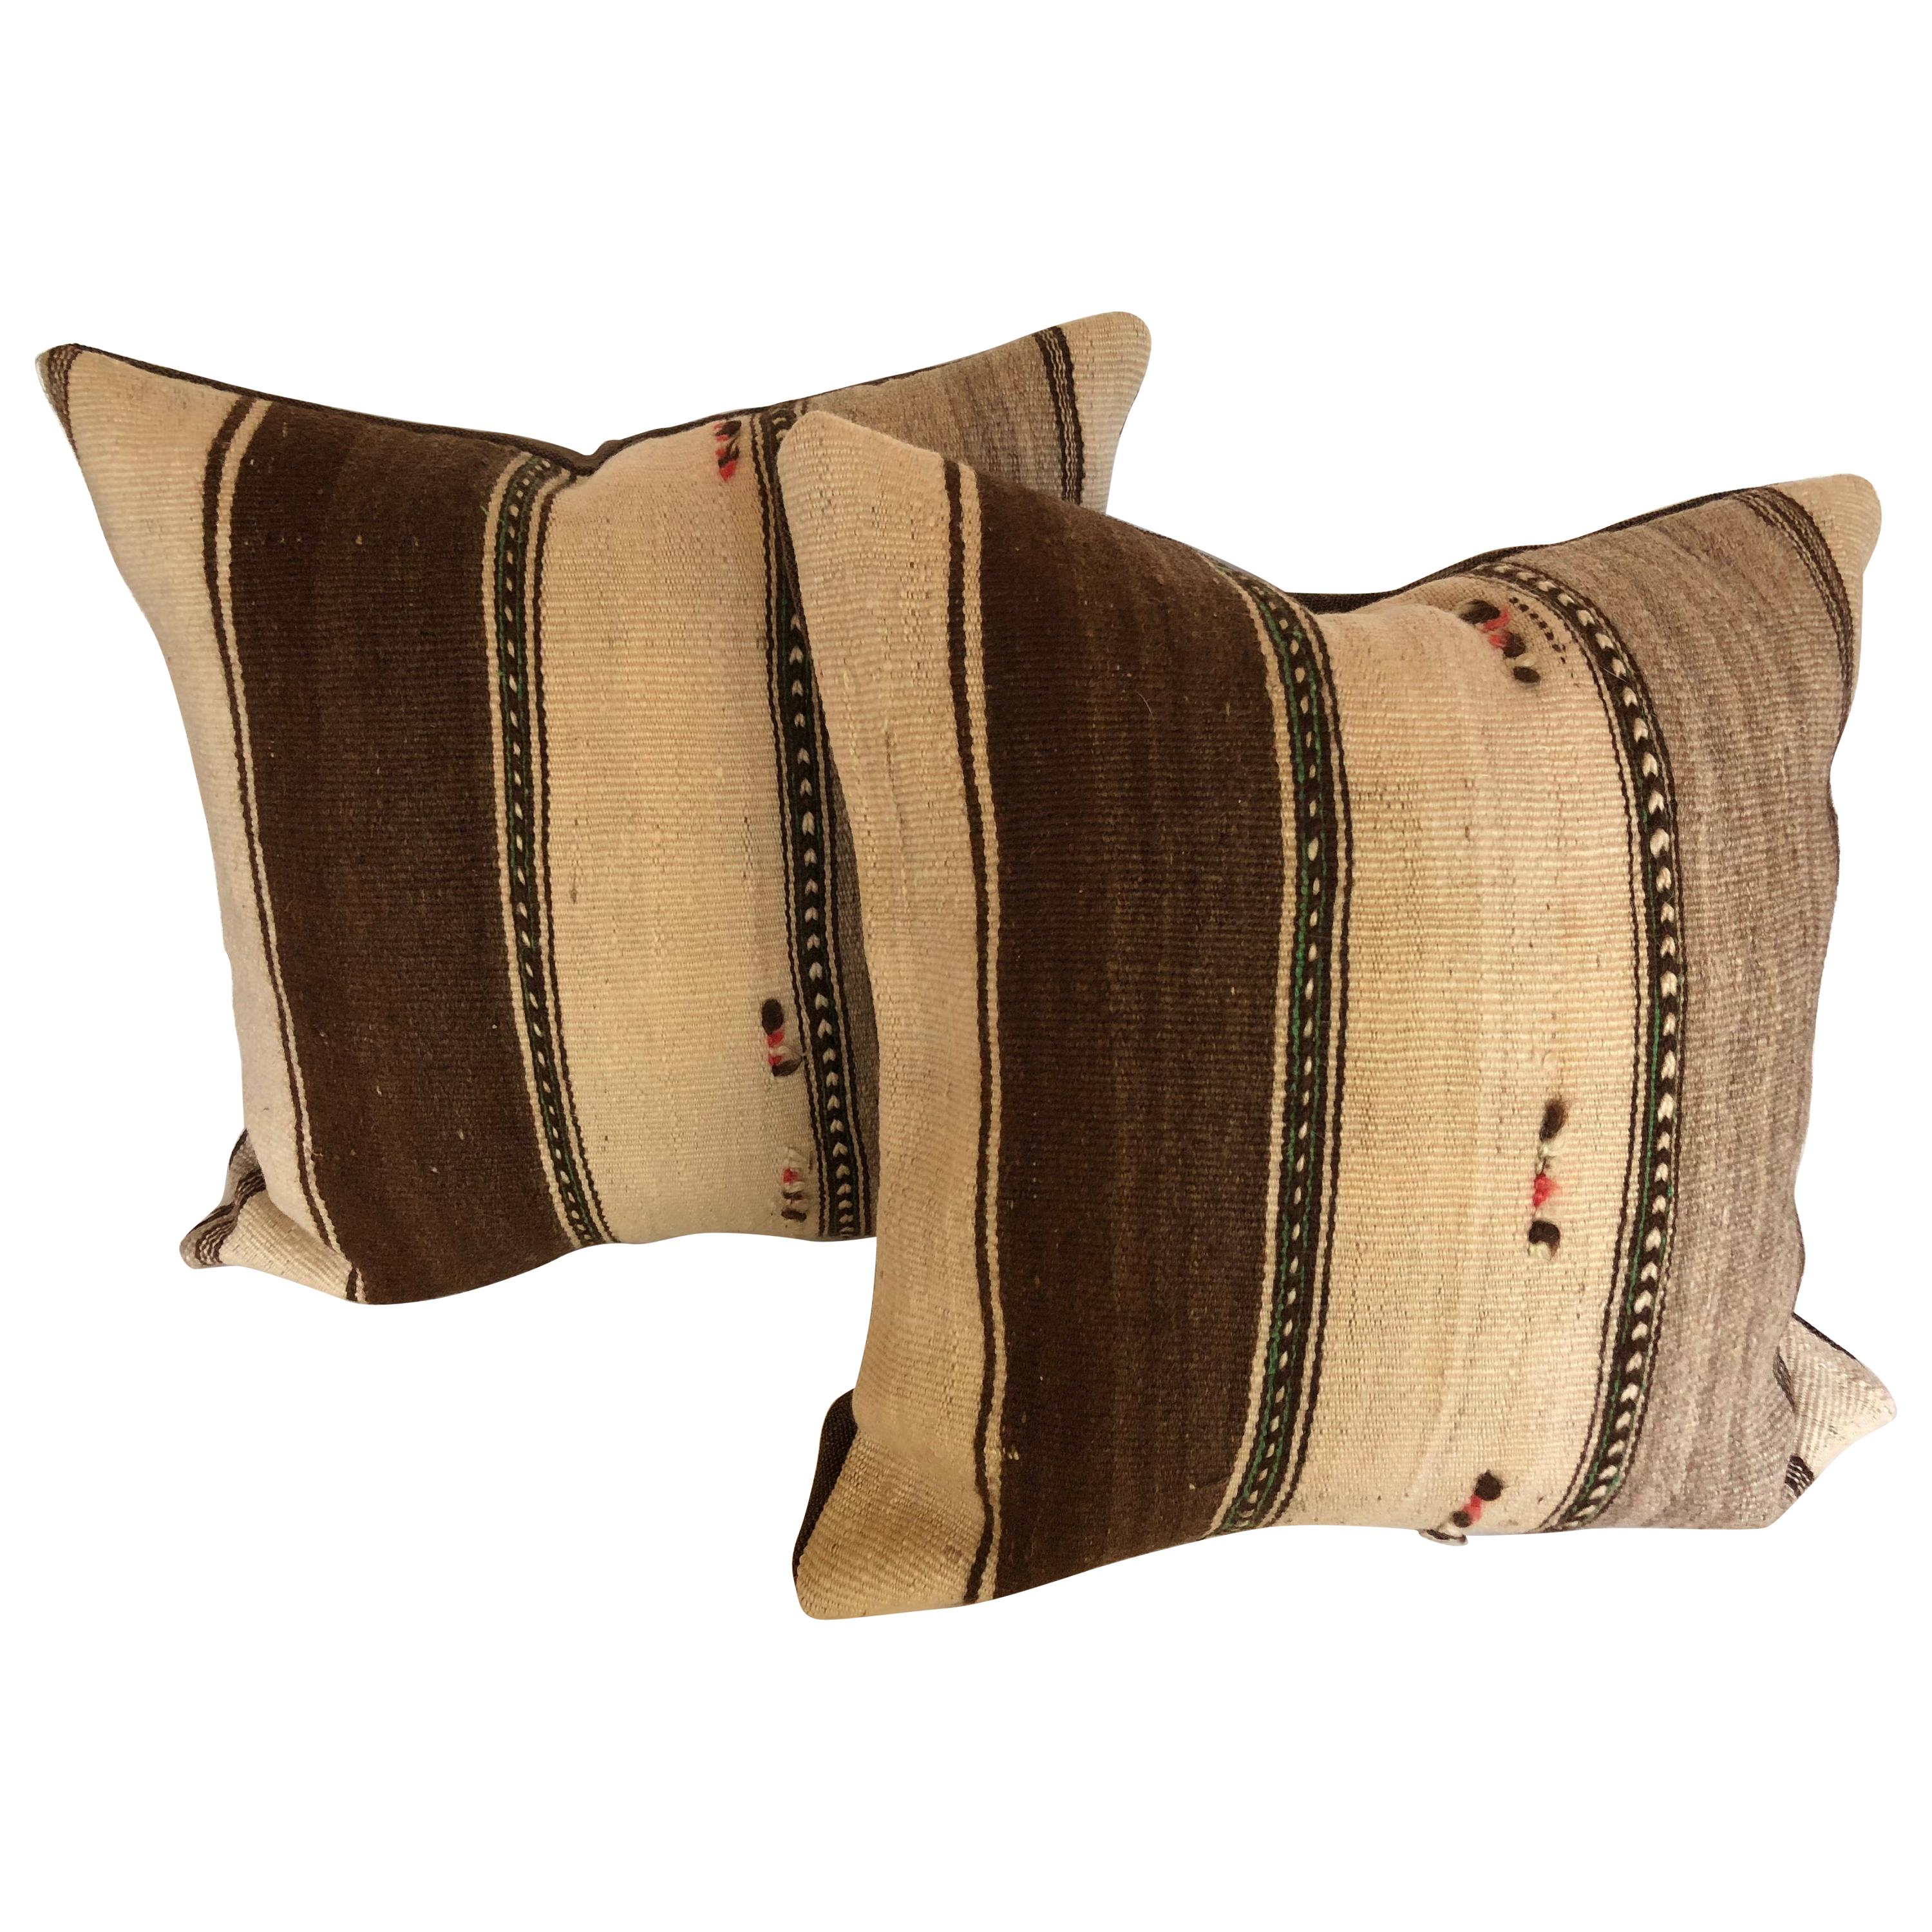 Custom Pillows Cut from a Vintage Moroccan Wool Berber Rug, Atlas Mountains